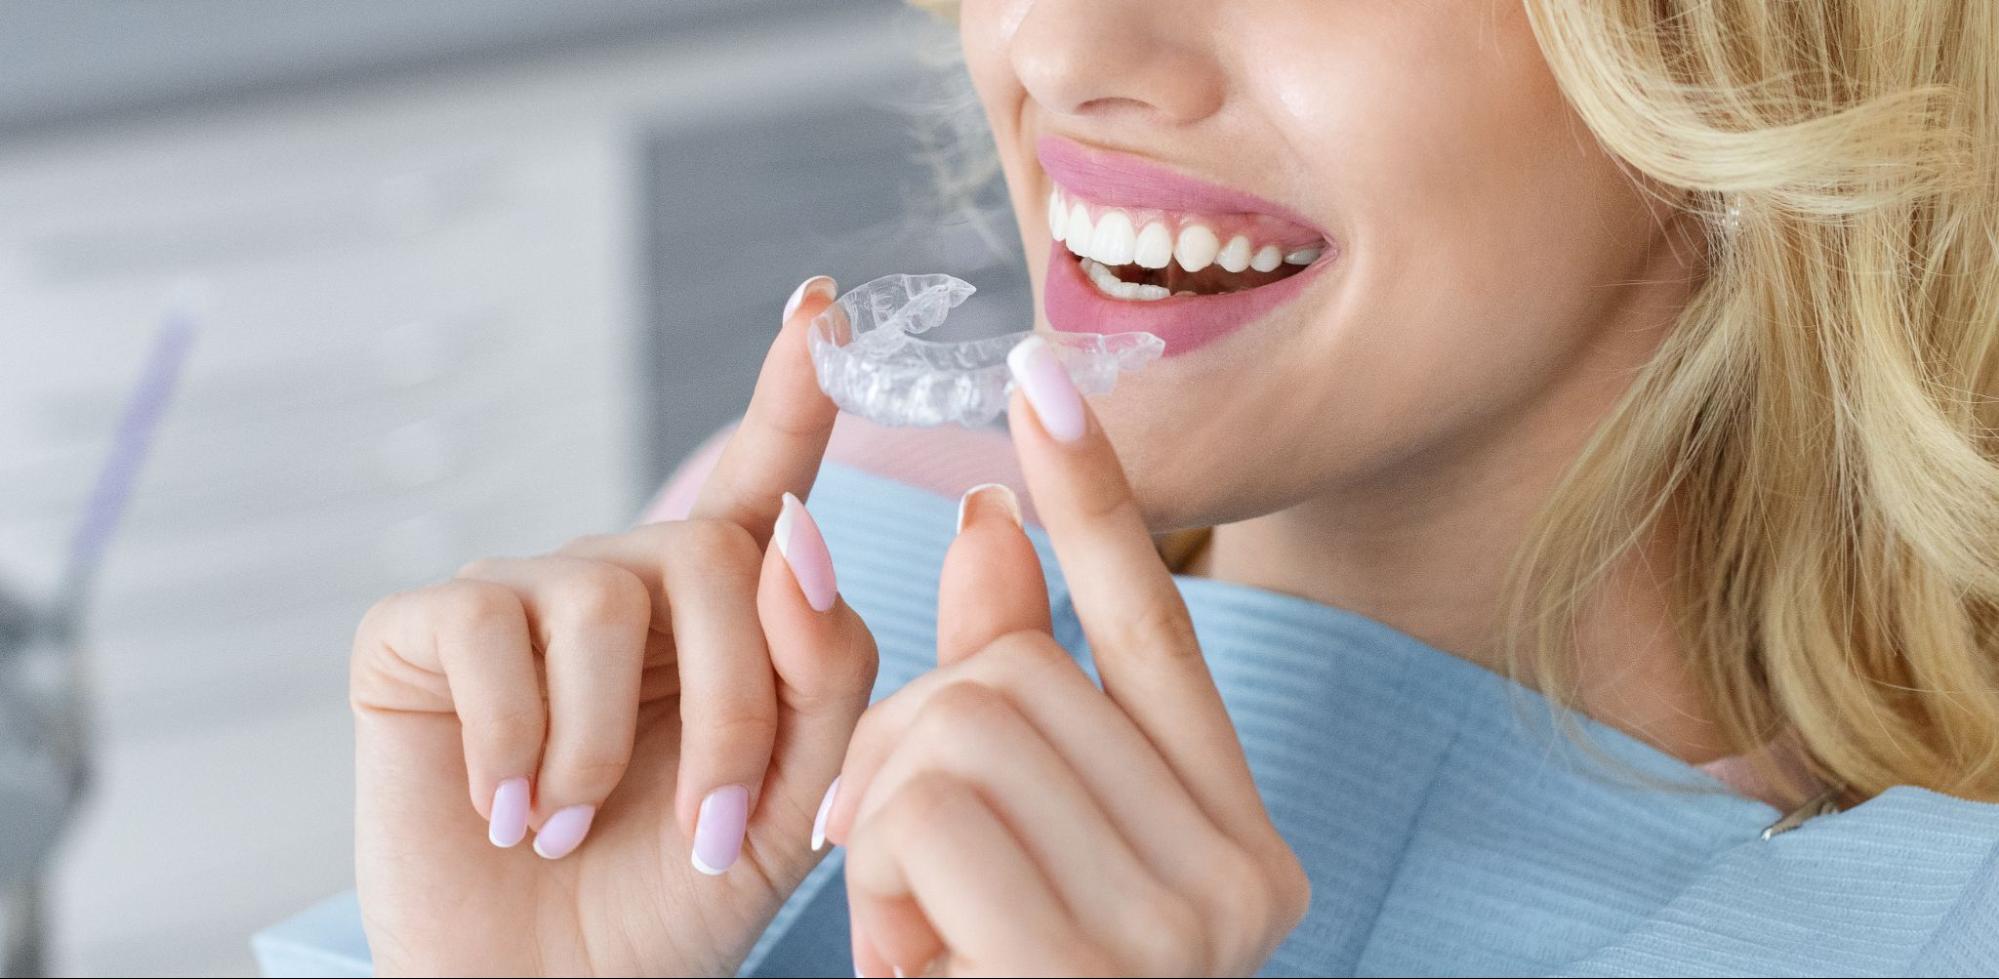 5 Keys To Creating Beautiful Smiles With Aligners